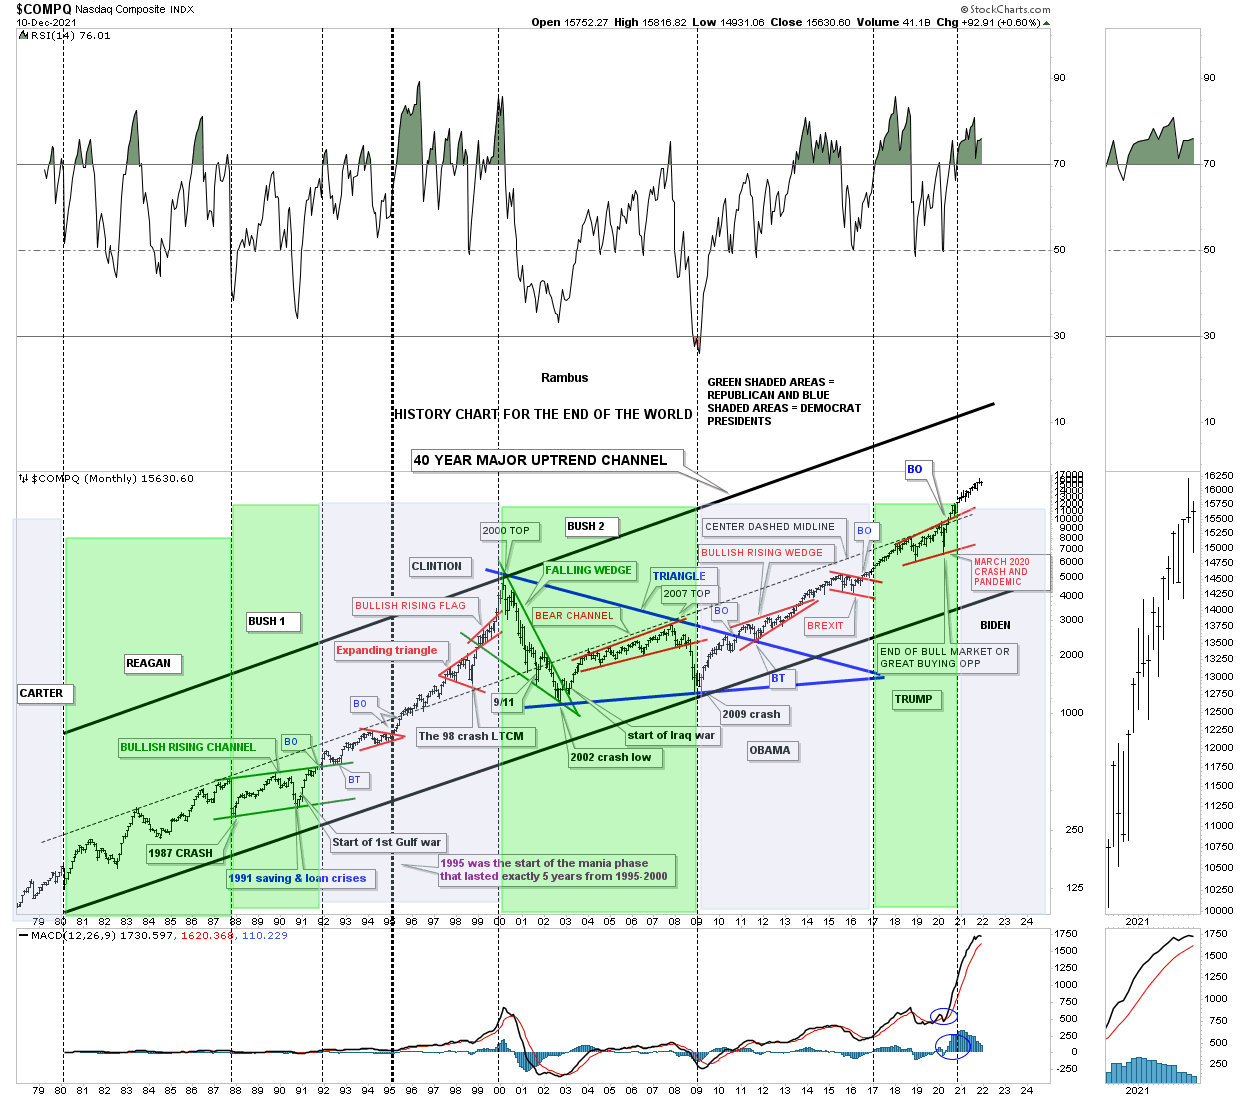 COMPQ Monthly Chart